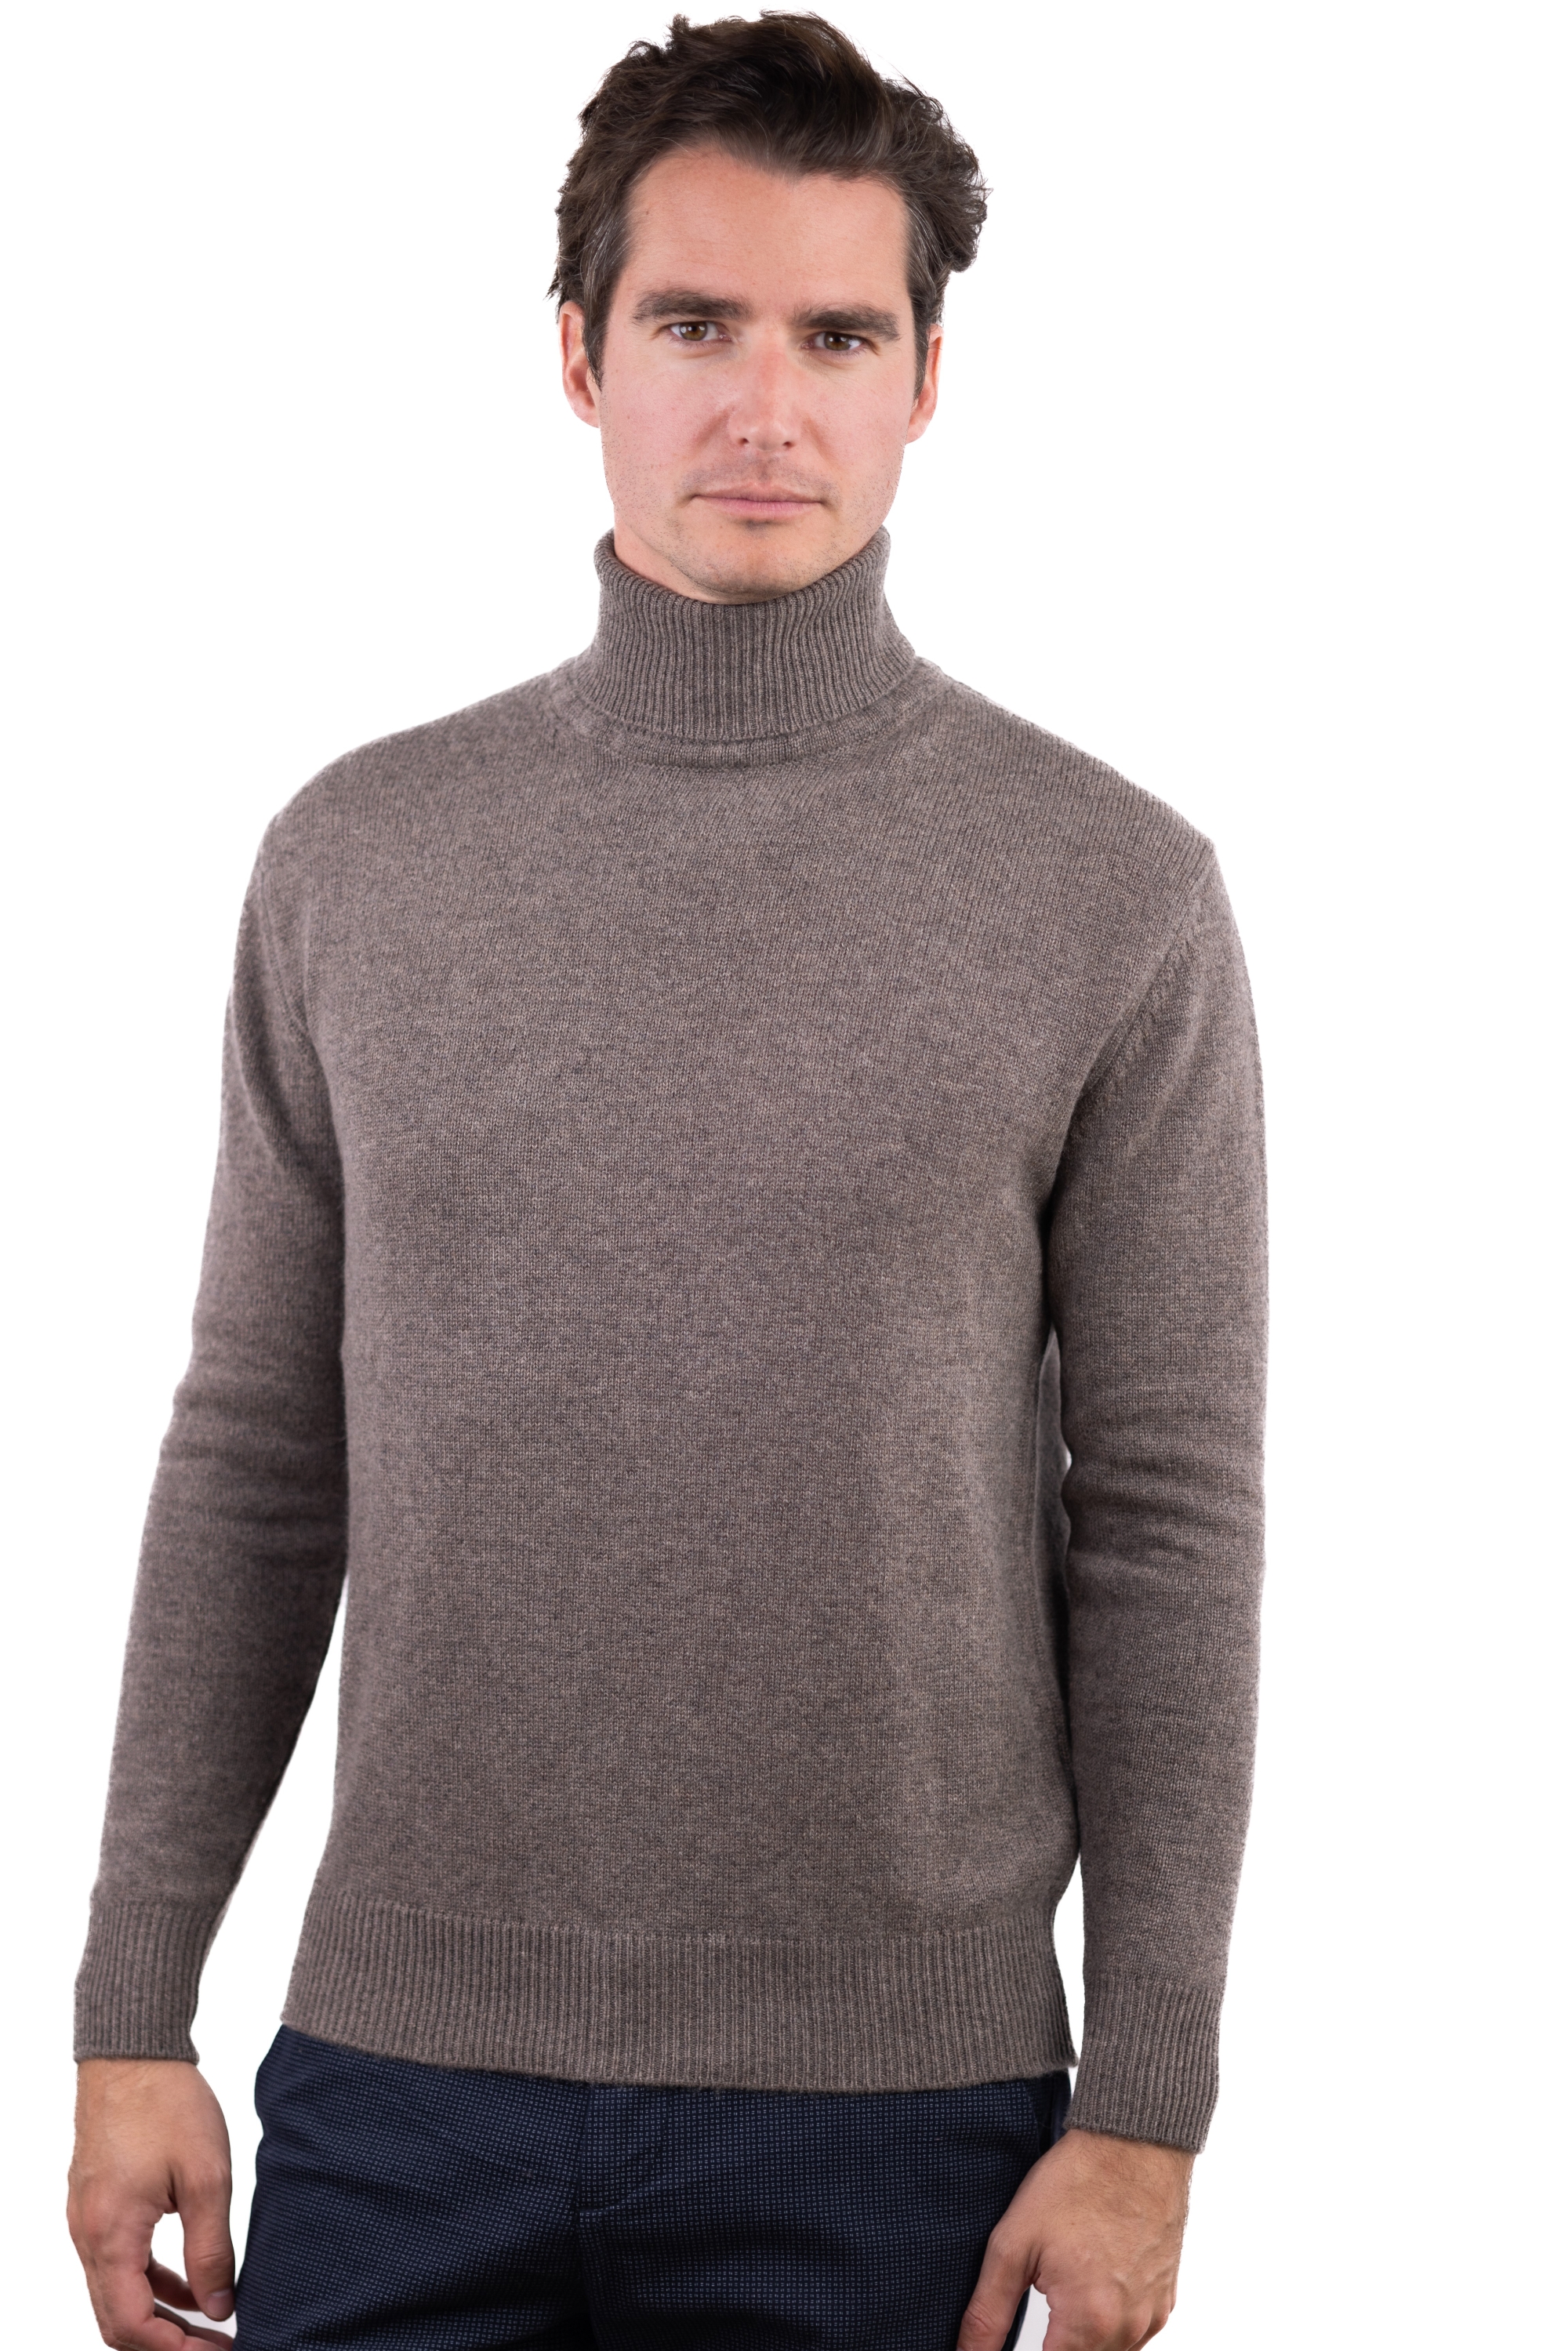 Cashmere men basic sweaters at low prices torino first otter s